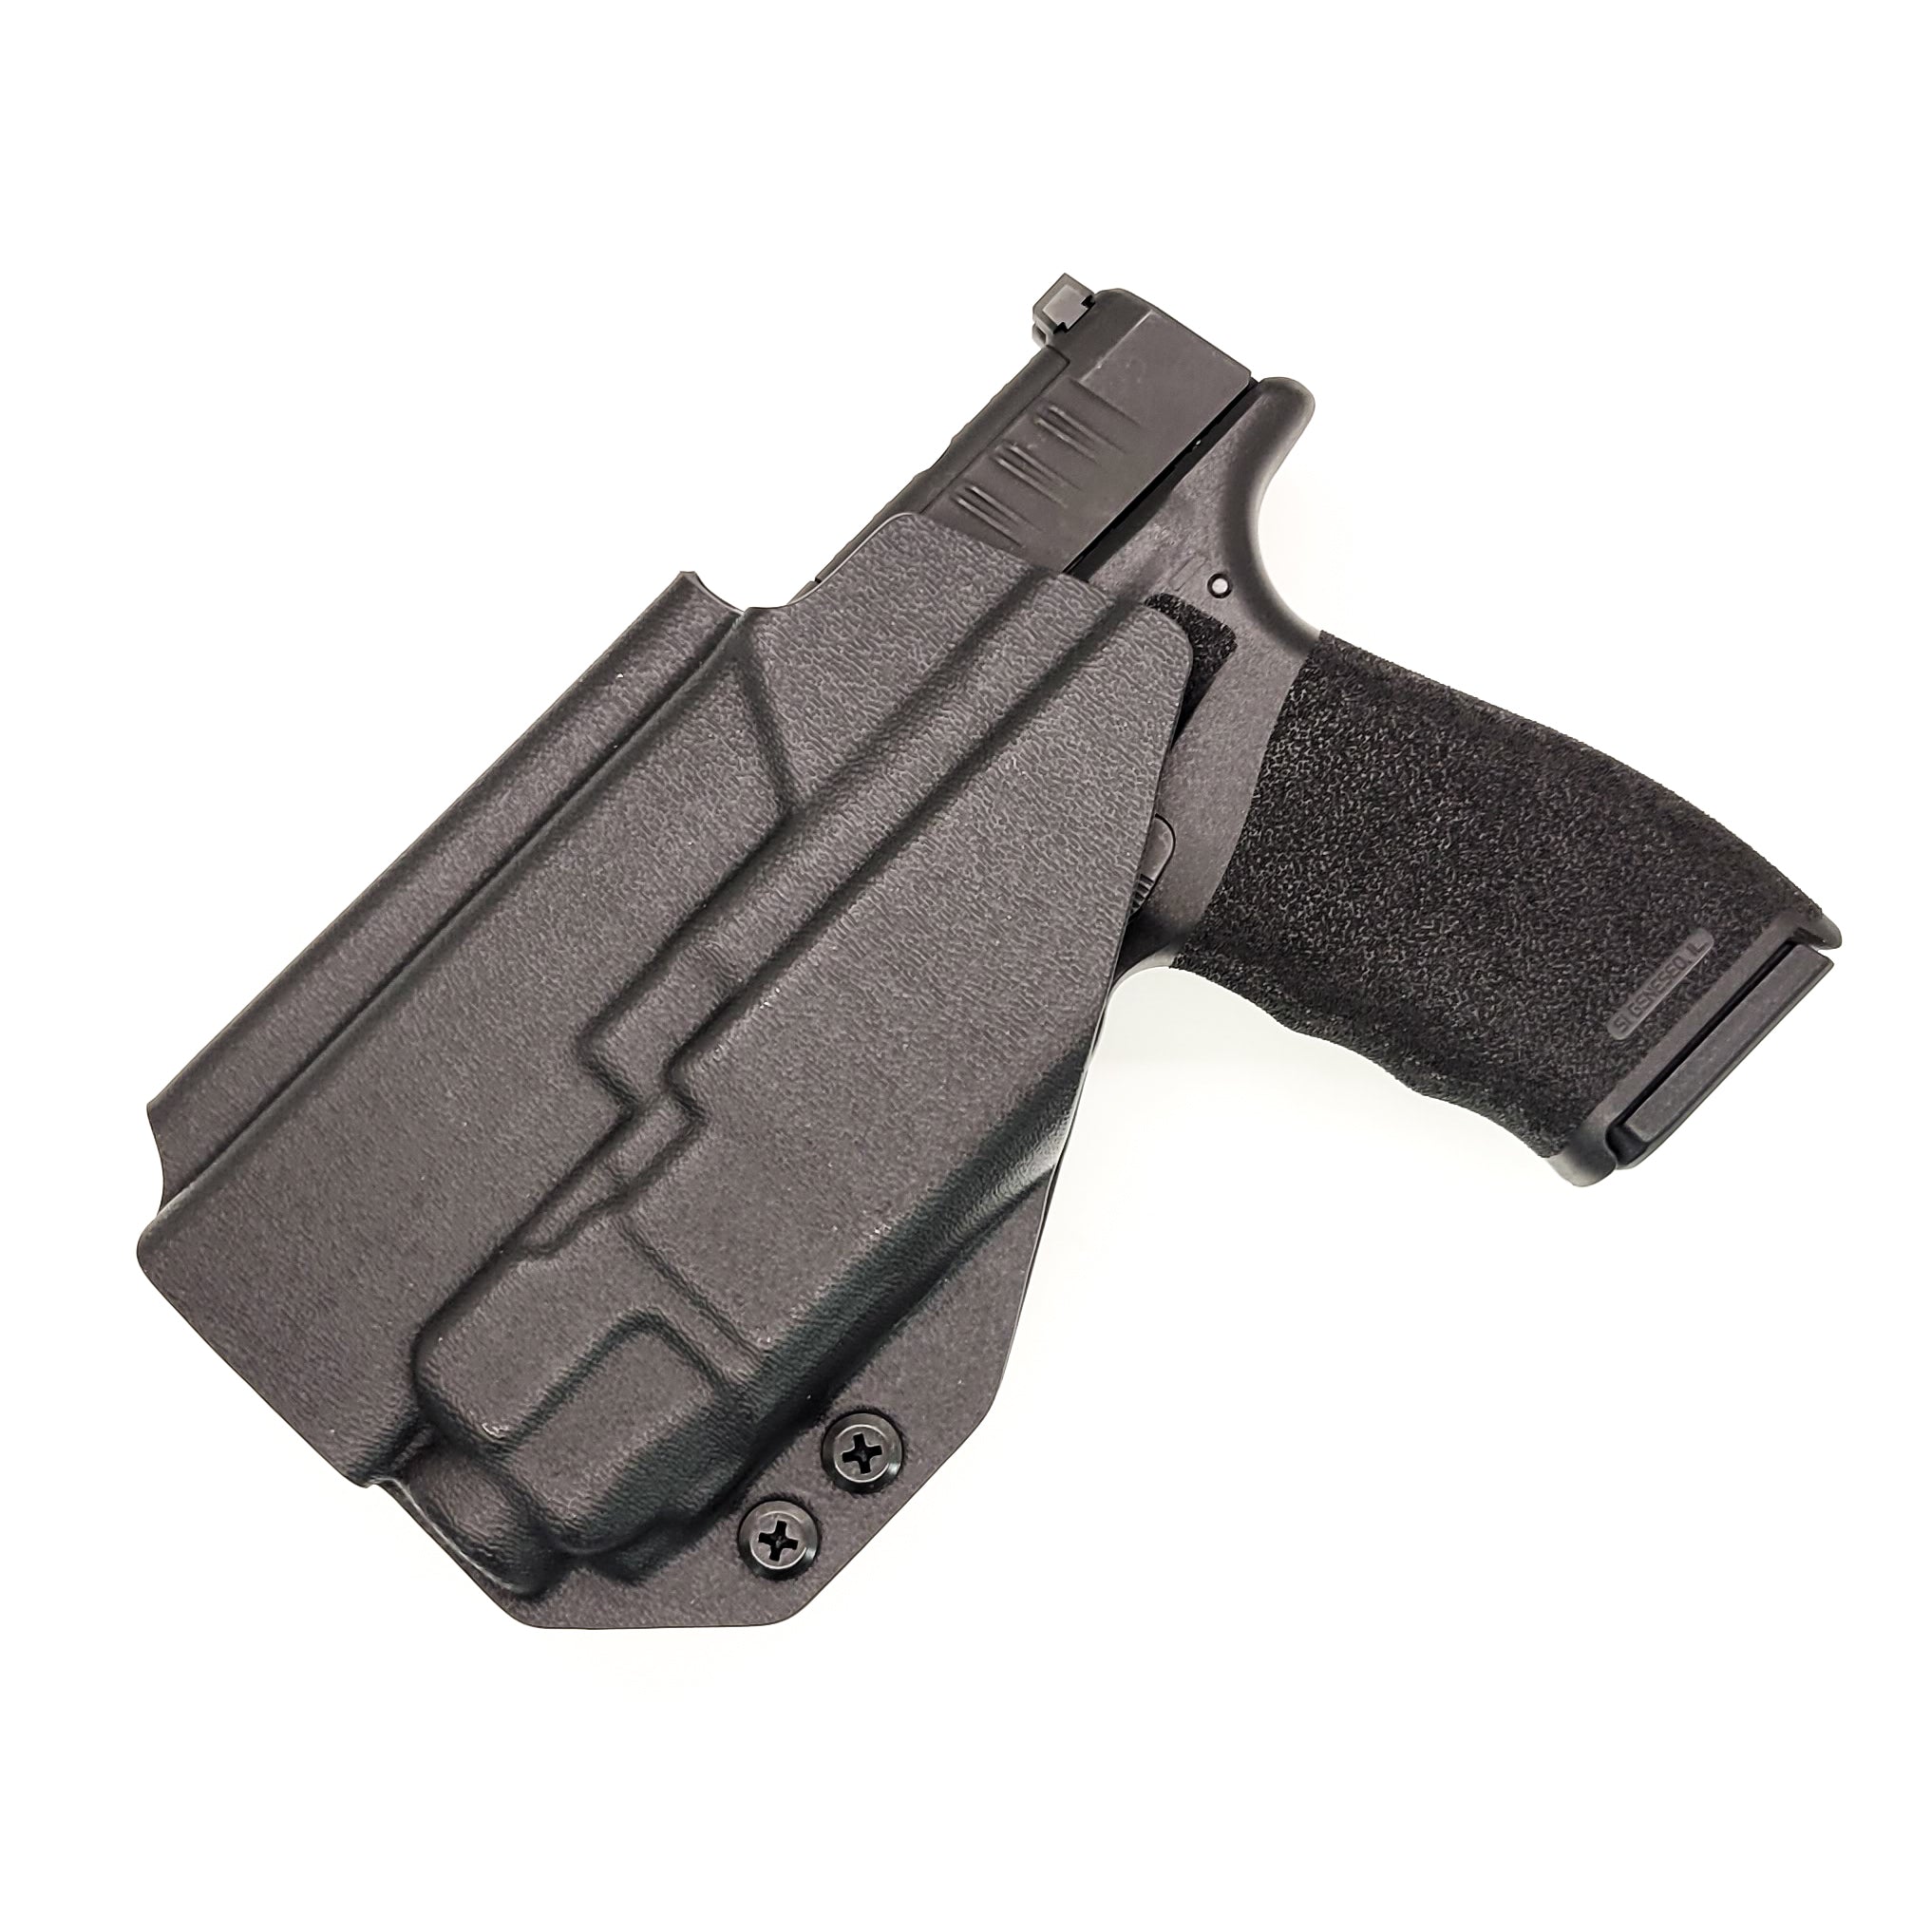 Outside Waistband Holster designed to fit the Springfield Hellcat Pro pistol with the Streamlight TLR-8 & TLR-8A light mounted to the handgun. The holster retention is on the light itself and not the pistol. Full sweat guard, adjustable retention, minimal material, and smooth edges to reduce printing. Made in the USA. 